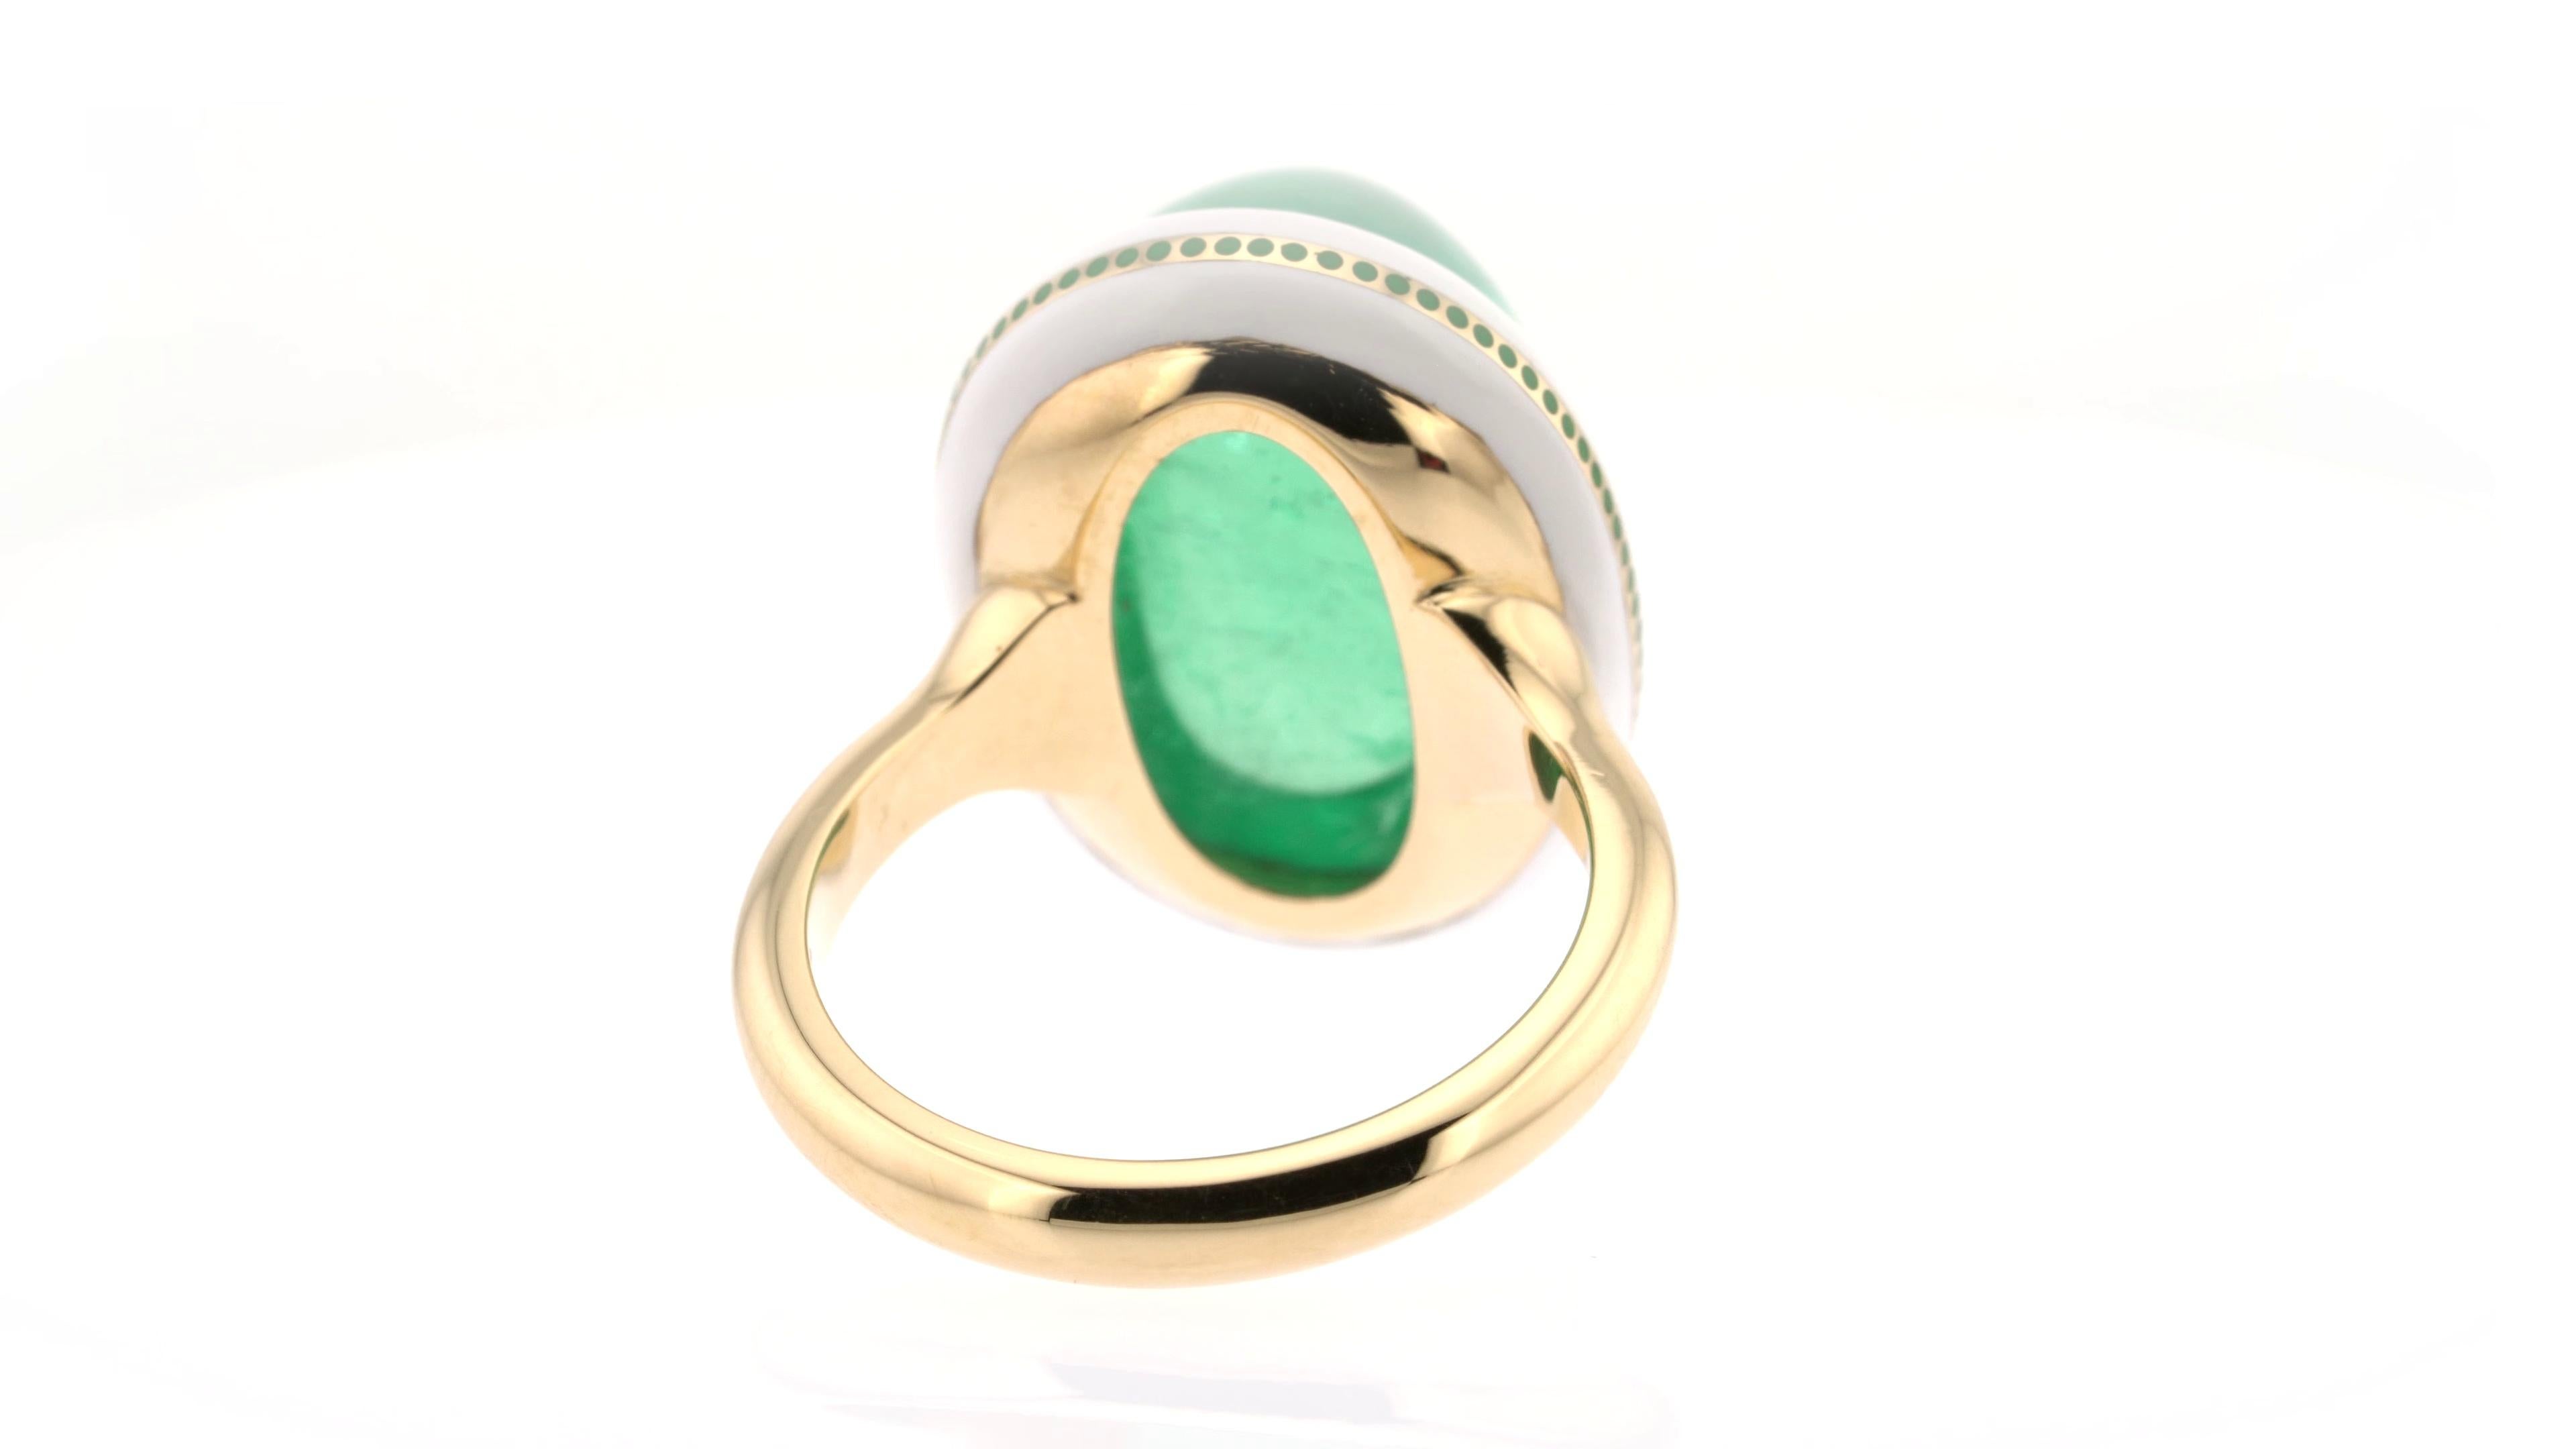 Spectacular 17 Carats Cabochon Emerald Ring in Yellow Gold with Ceramic Detail For Sale 2